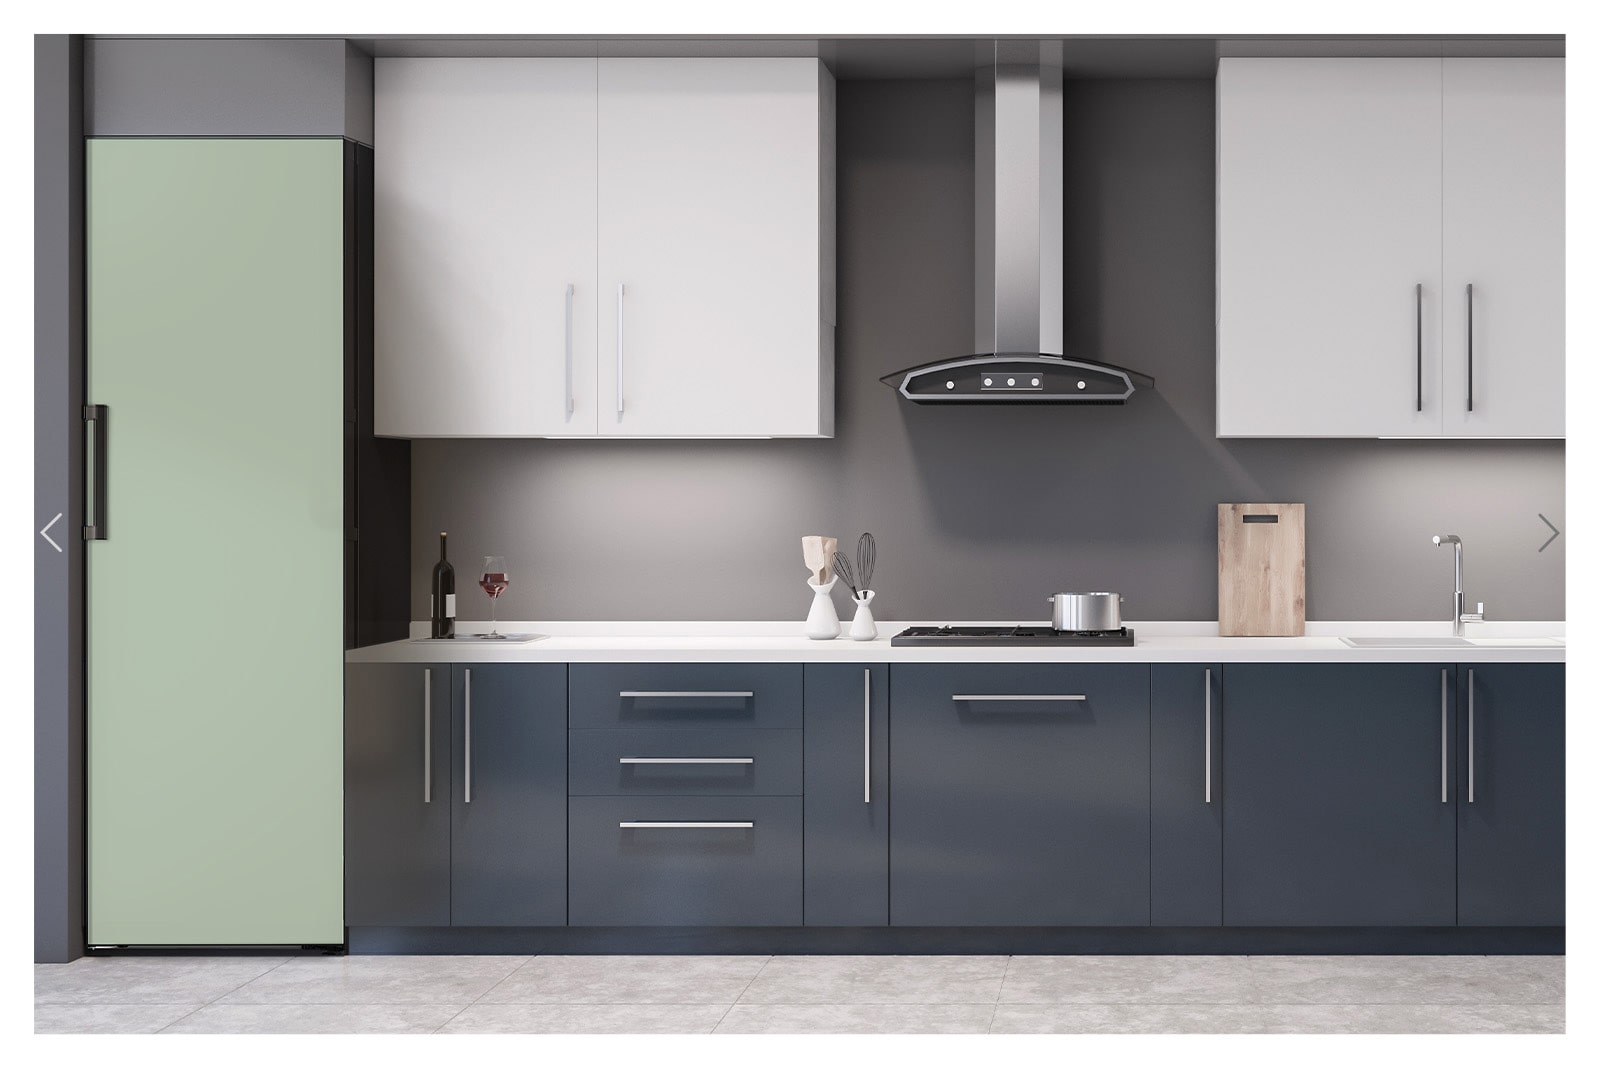 It shows mist mint color LG Larder Objet Collection is placed in a dark-tone modern kitchen.